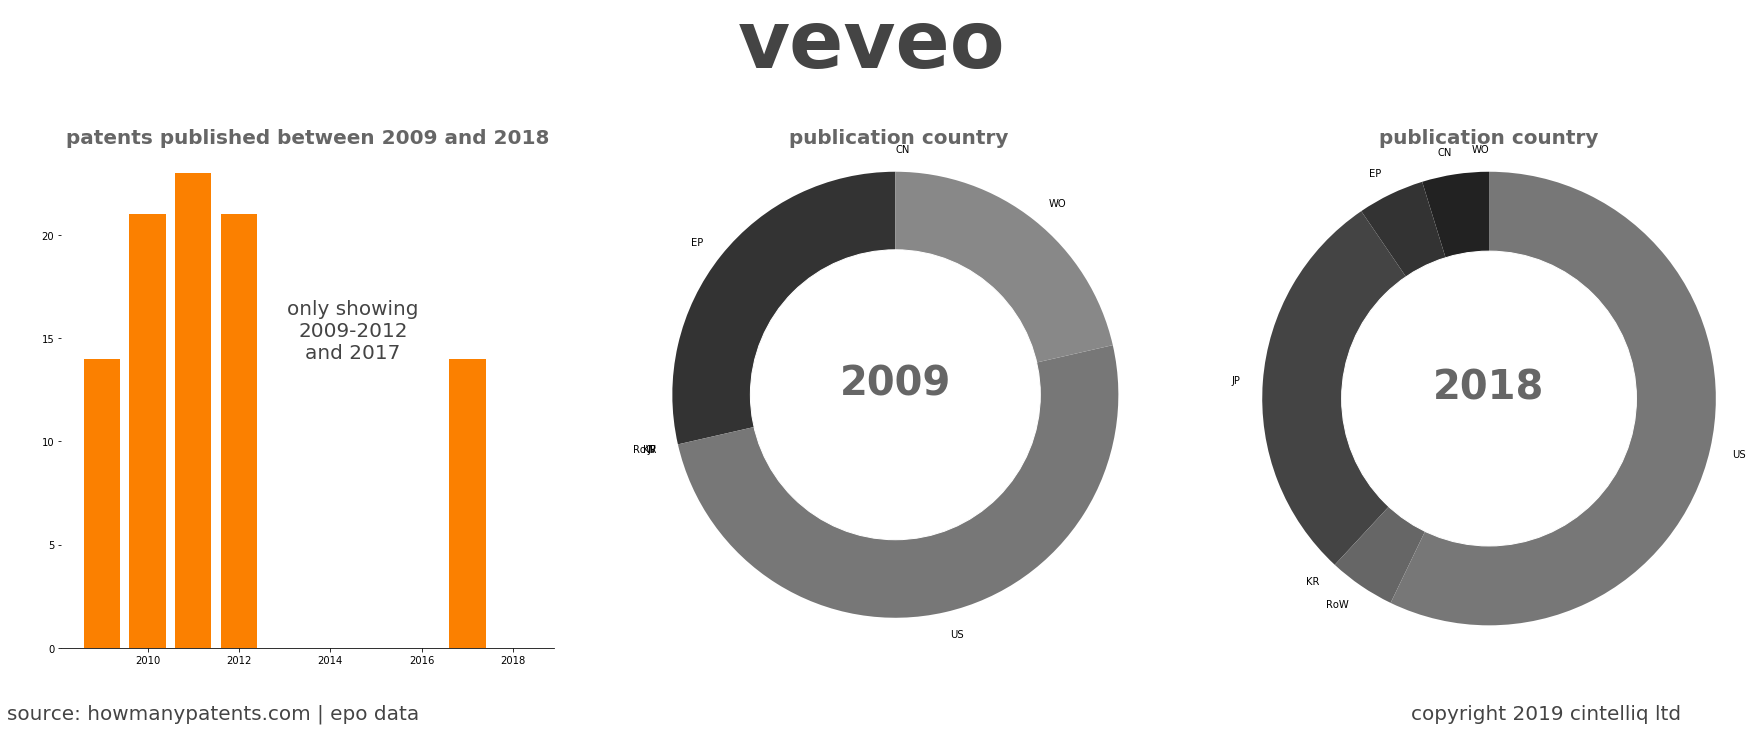 summary of patents for Veveo